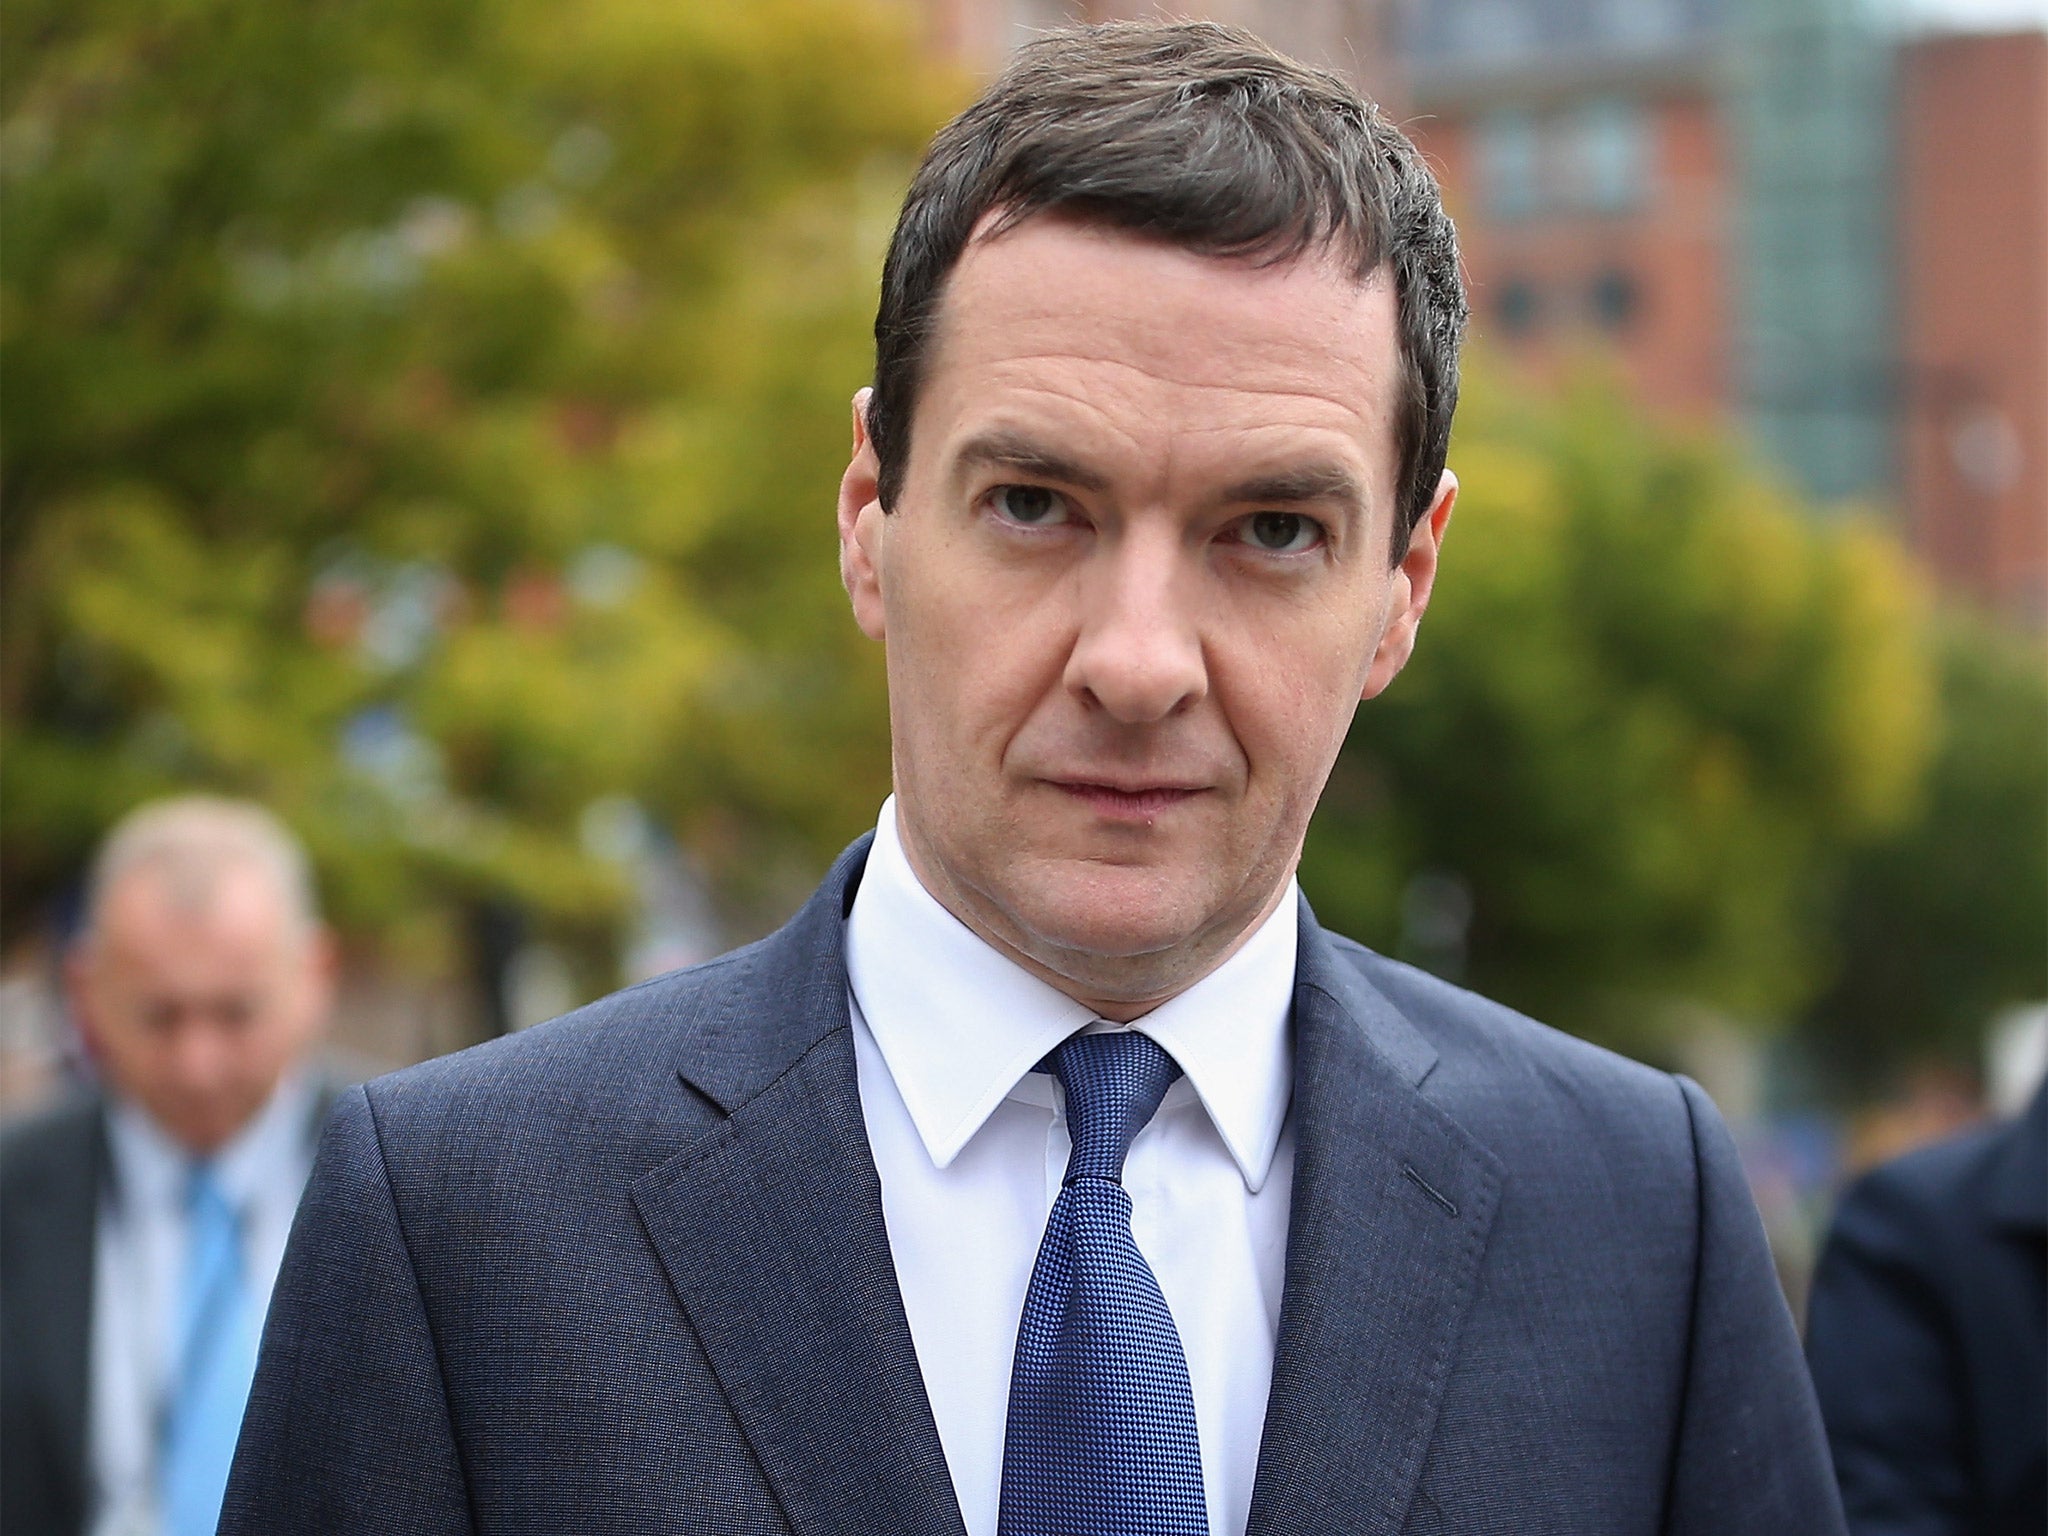 The Chancellor is reported to have insisted President Xi Jinping head to Manchester instead of Birmingham